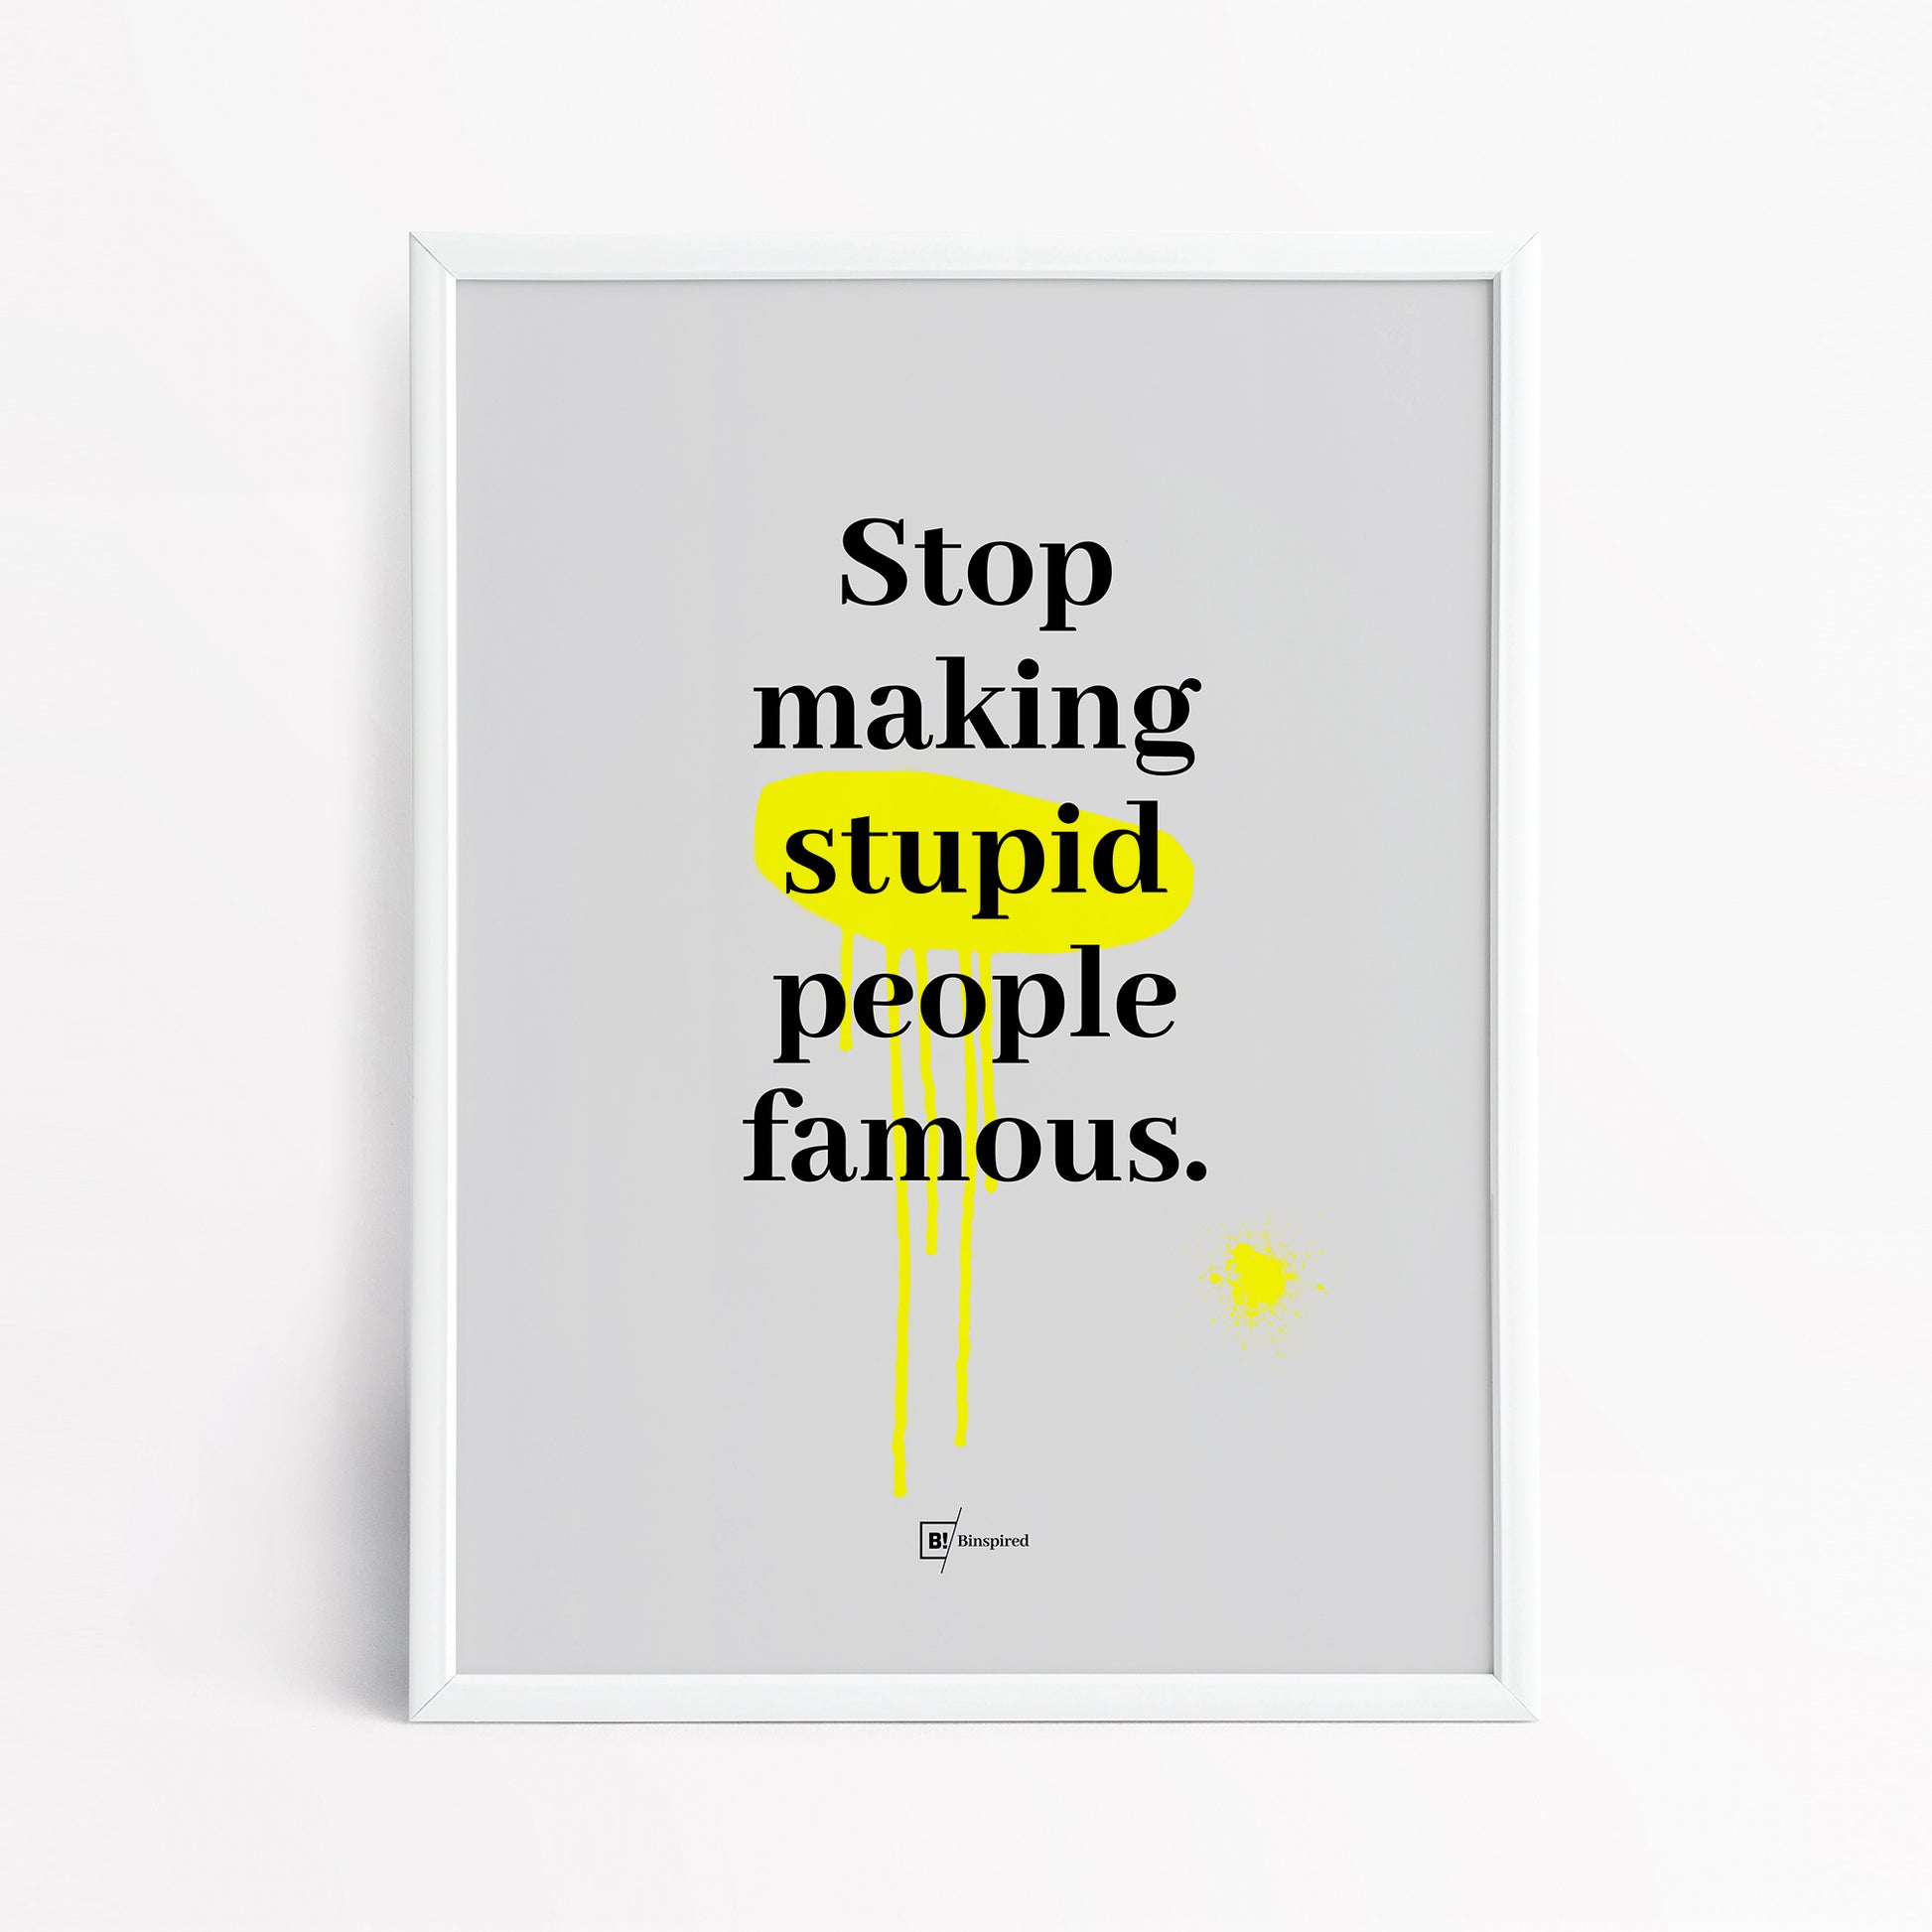 Be inspired by our "Stop making stupid people famous" quote art print! This artwork was printed using the giclée process on archival acid-free paper and is presented in a simple white frame that captures its timeless beauty in every detail.